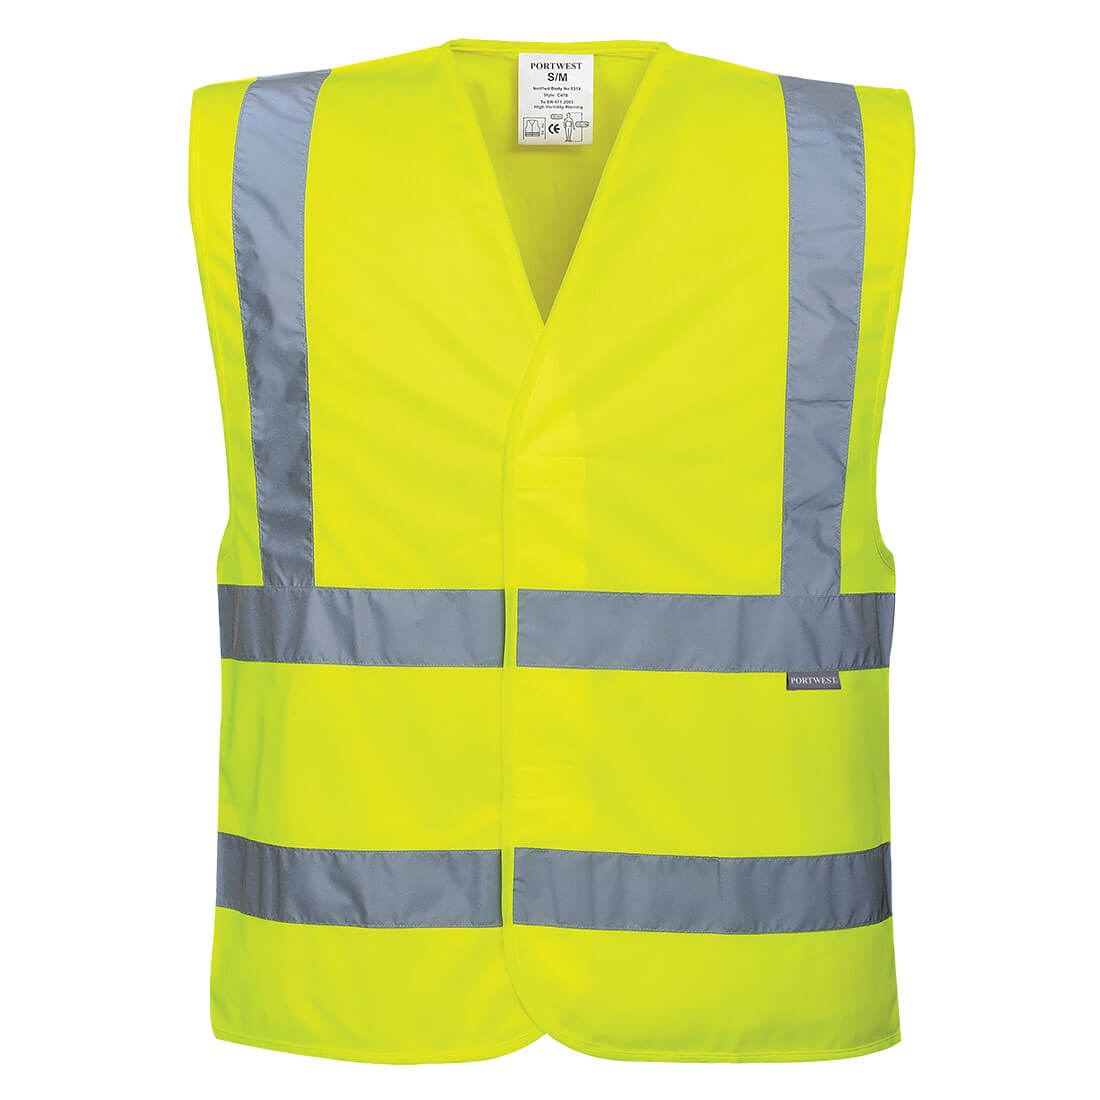 Image of Portwest Two Band and Brace Class 2 Hi Vis Waistcoat Yellow S / M